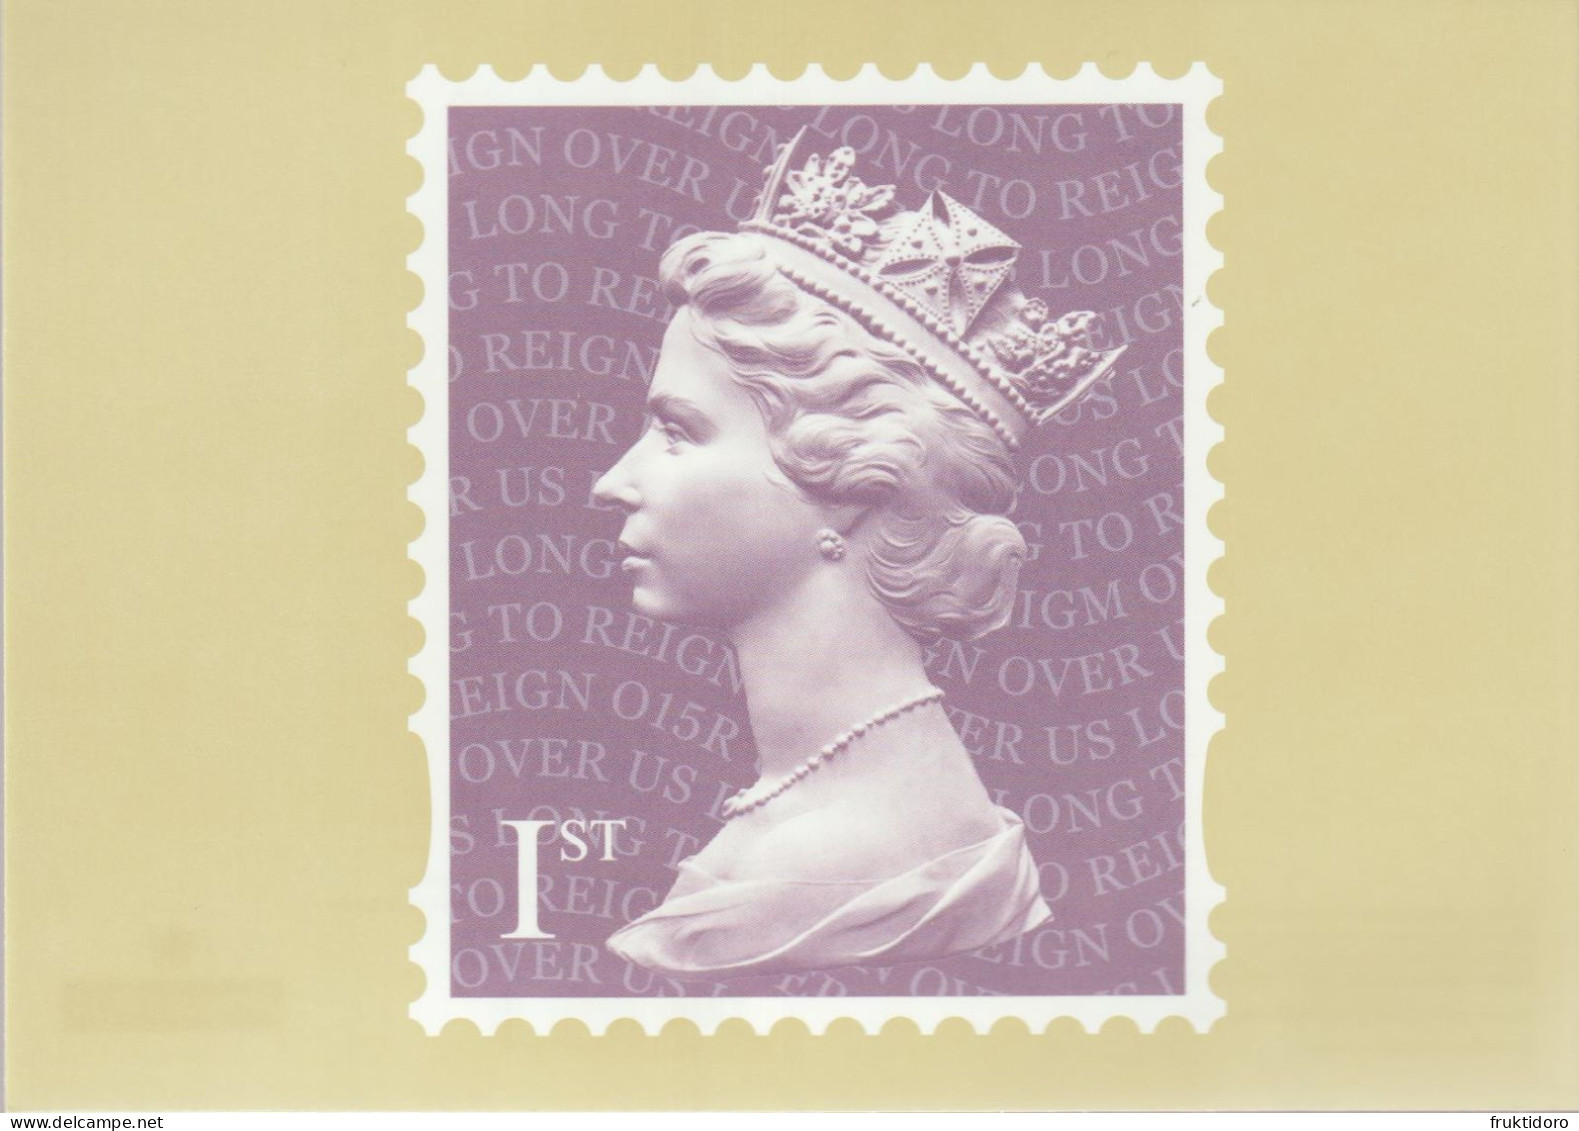 United Kingdom Postcards 2015 About Stamps In Mi Block 96 Queen Elizabeth II - Long To Reign Over Us ** - Collections